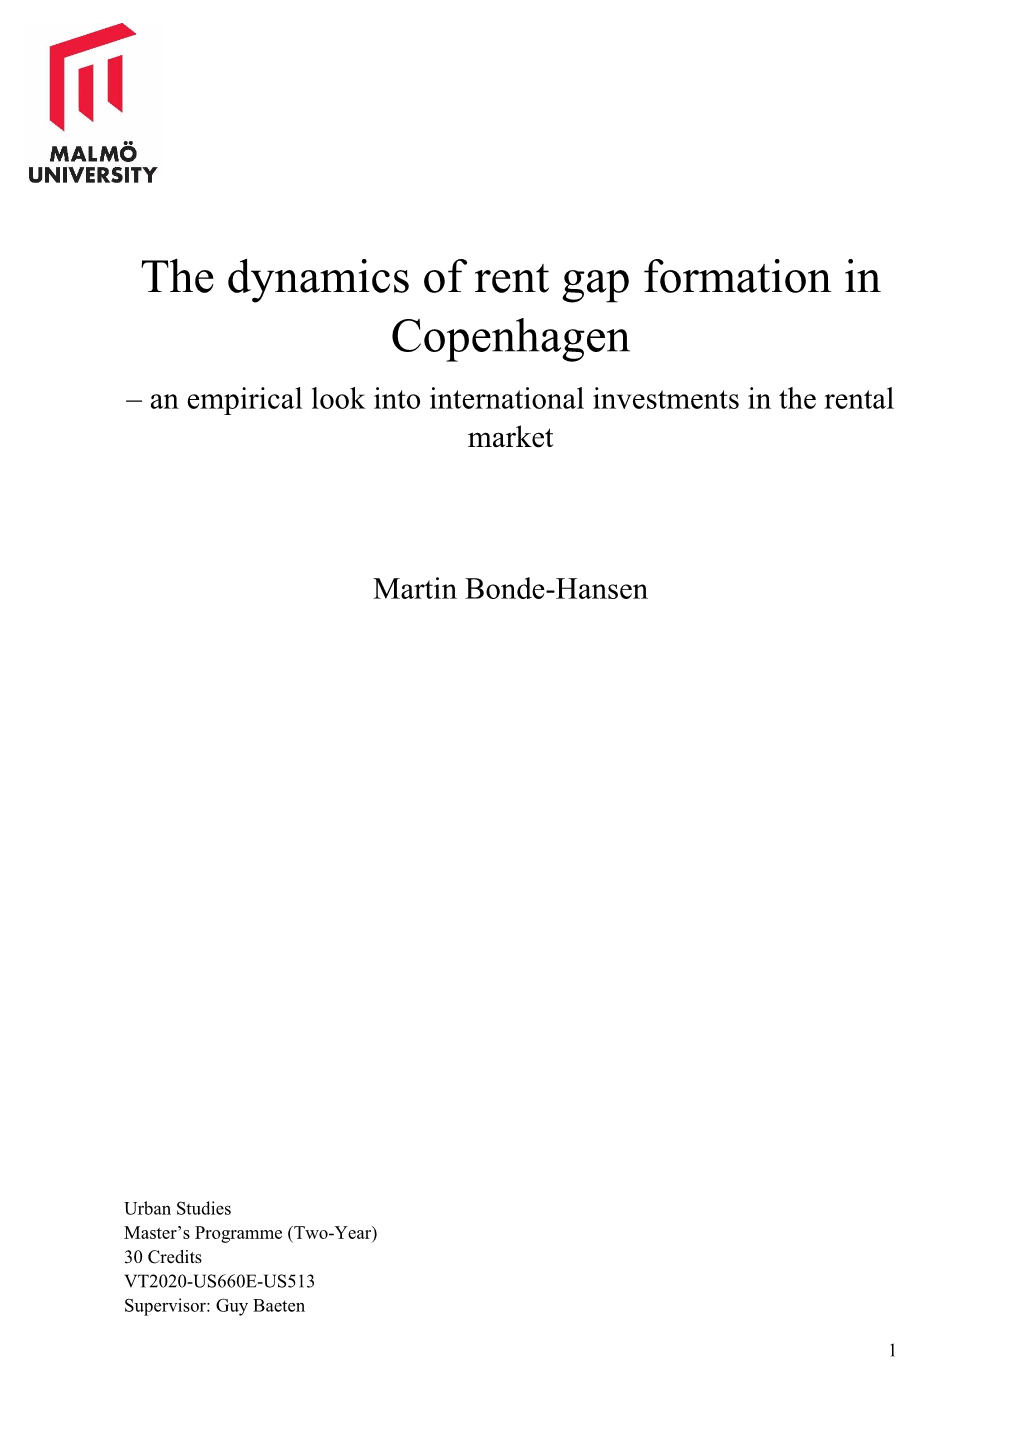 The Dynamics of Rent Gap Formation in Copenhagen – an Empirical Look Into International Investments in the Rental Market